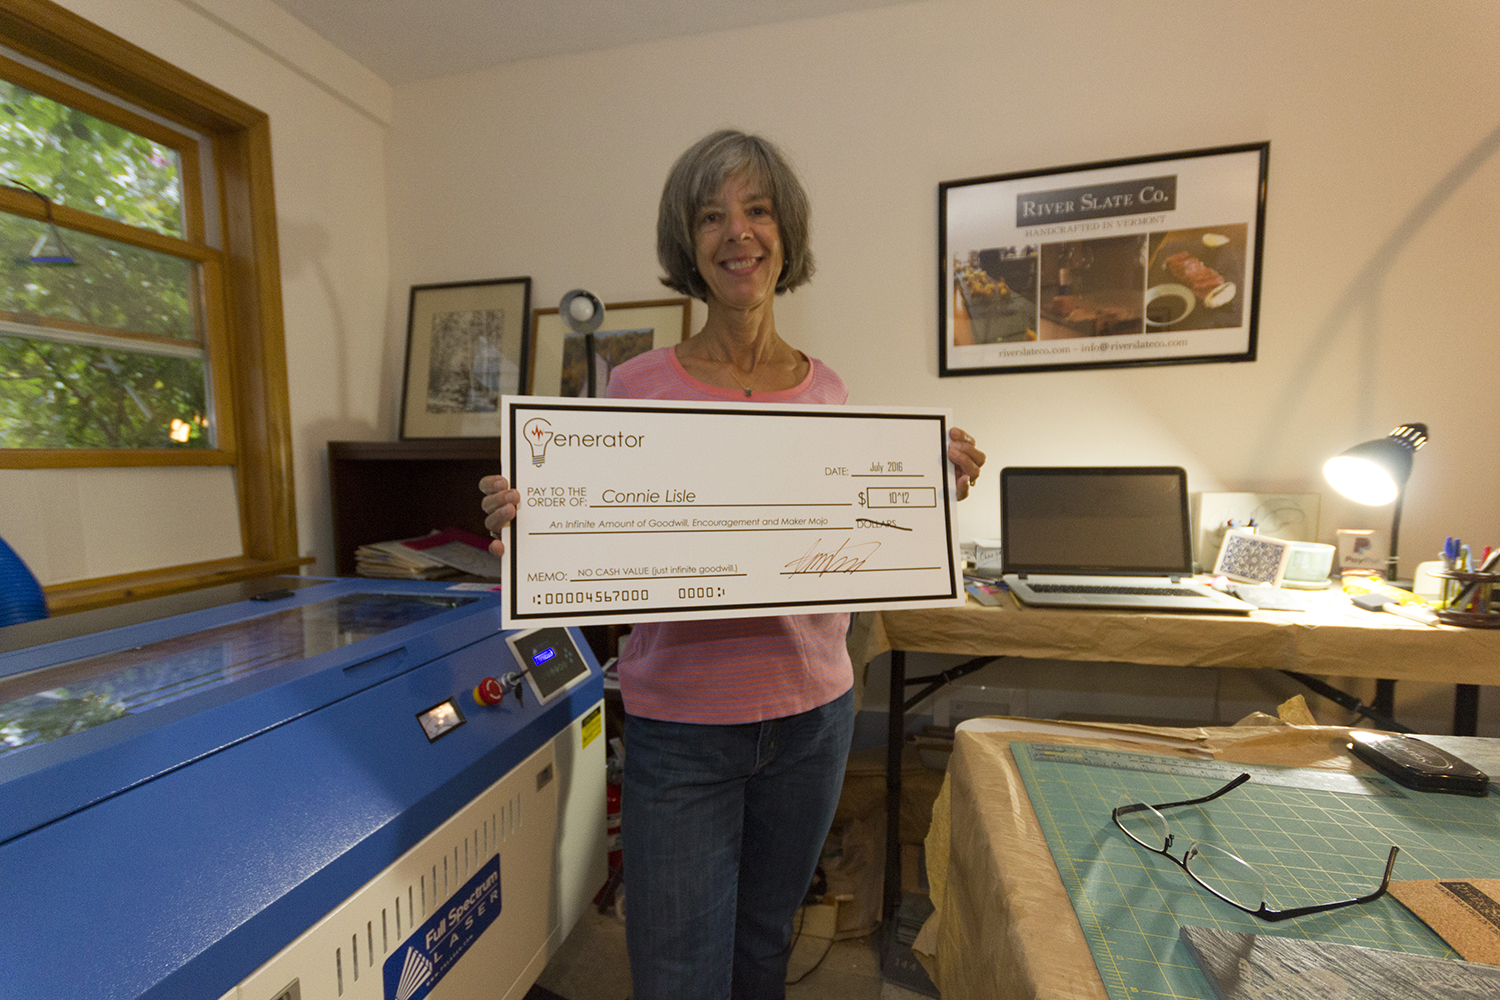 A big check of good wishes and encouragement from Generator, a Maker Space in Burlington, VT